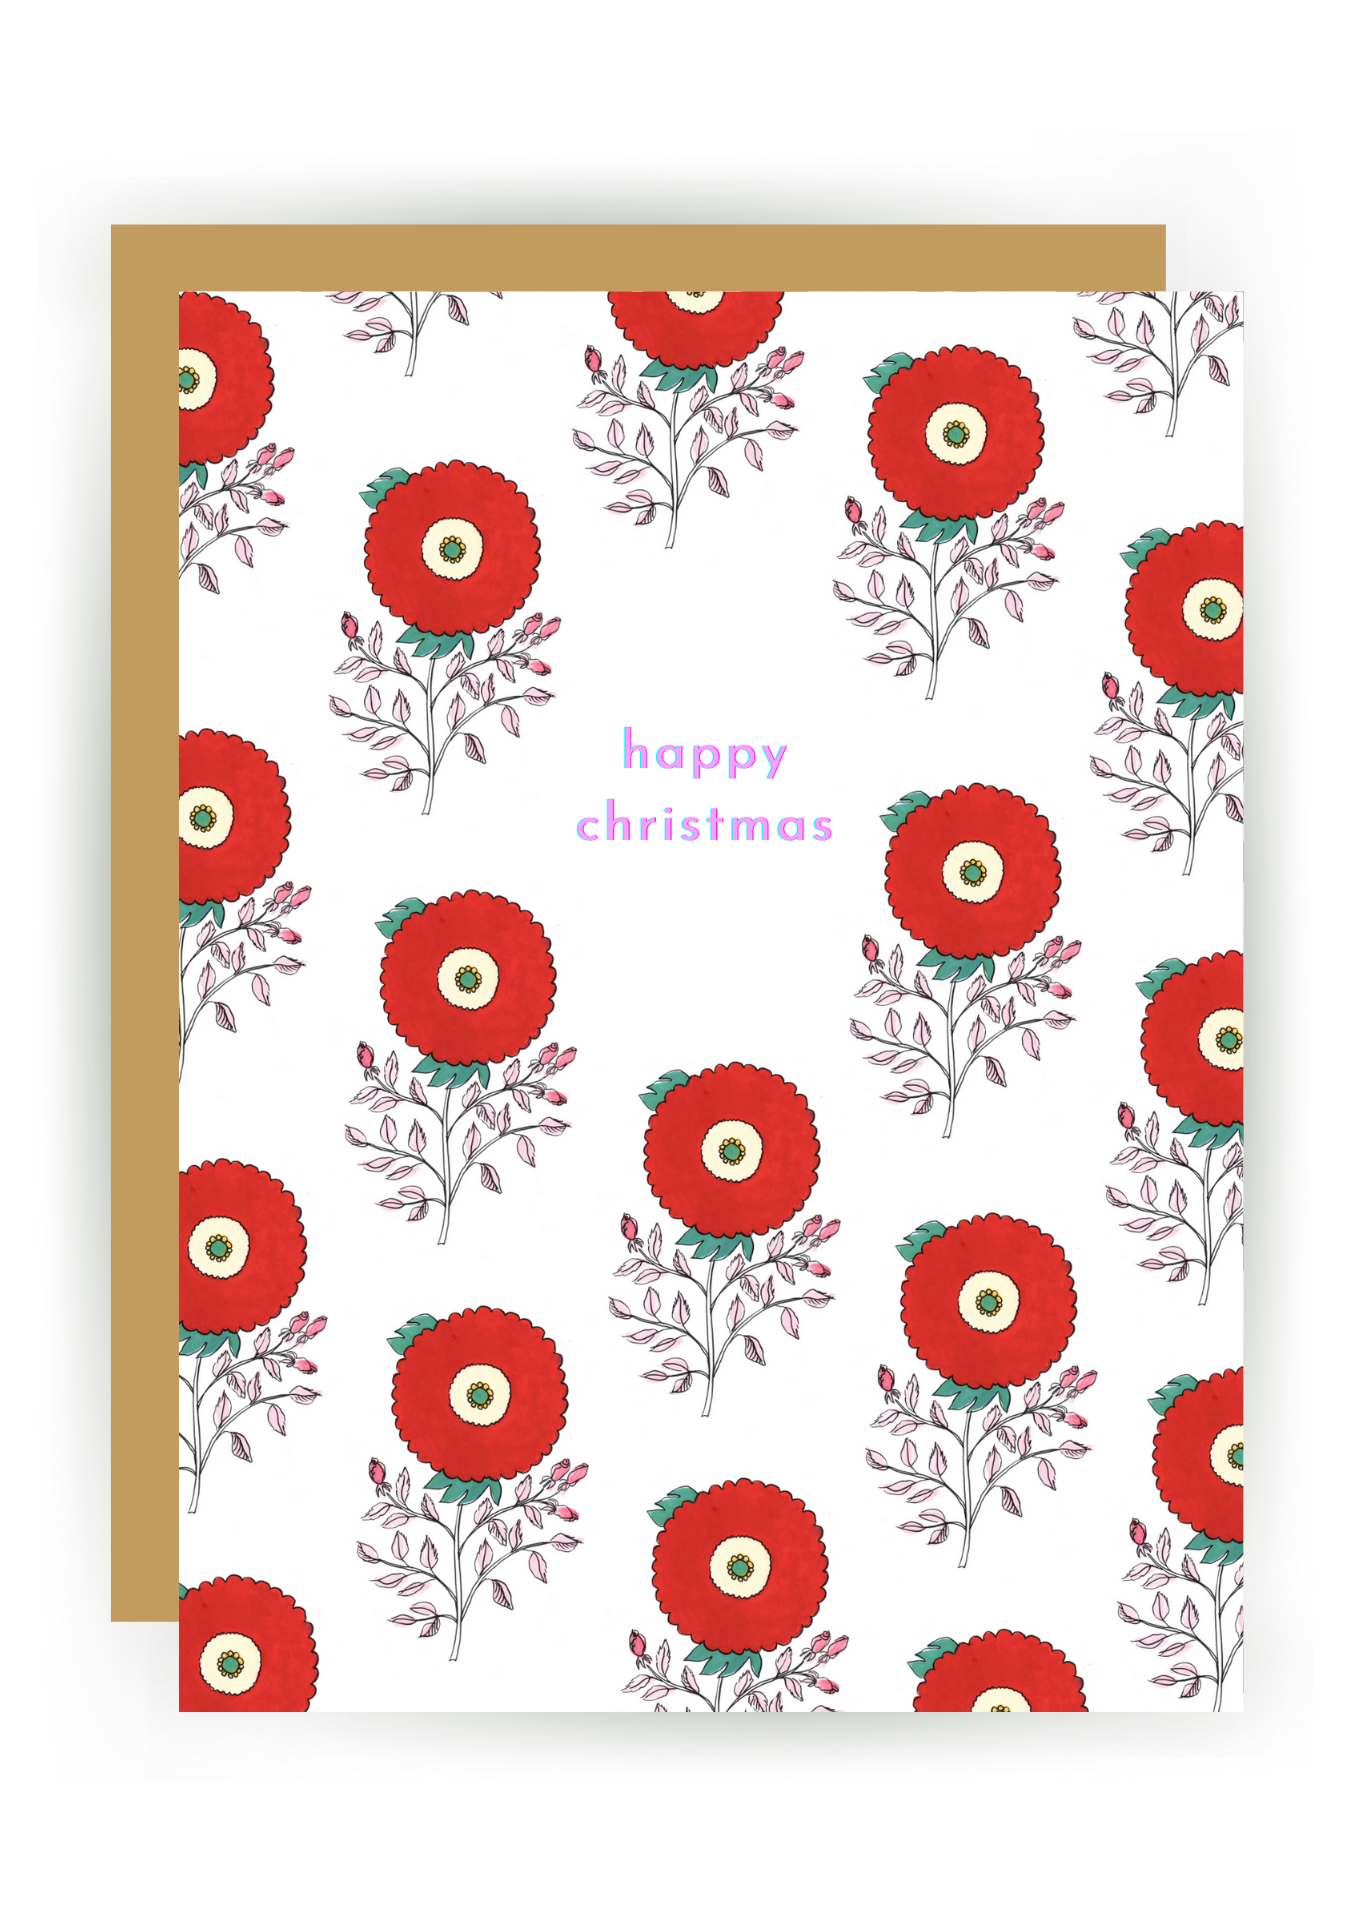 NF H 15 / Happy Christmas (roses) Greeting Card